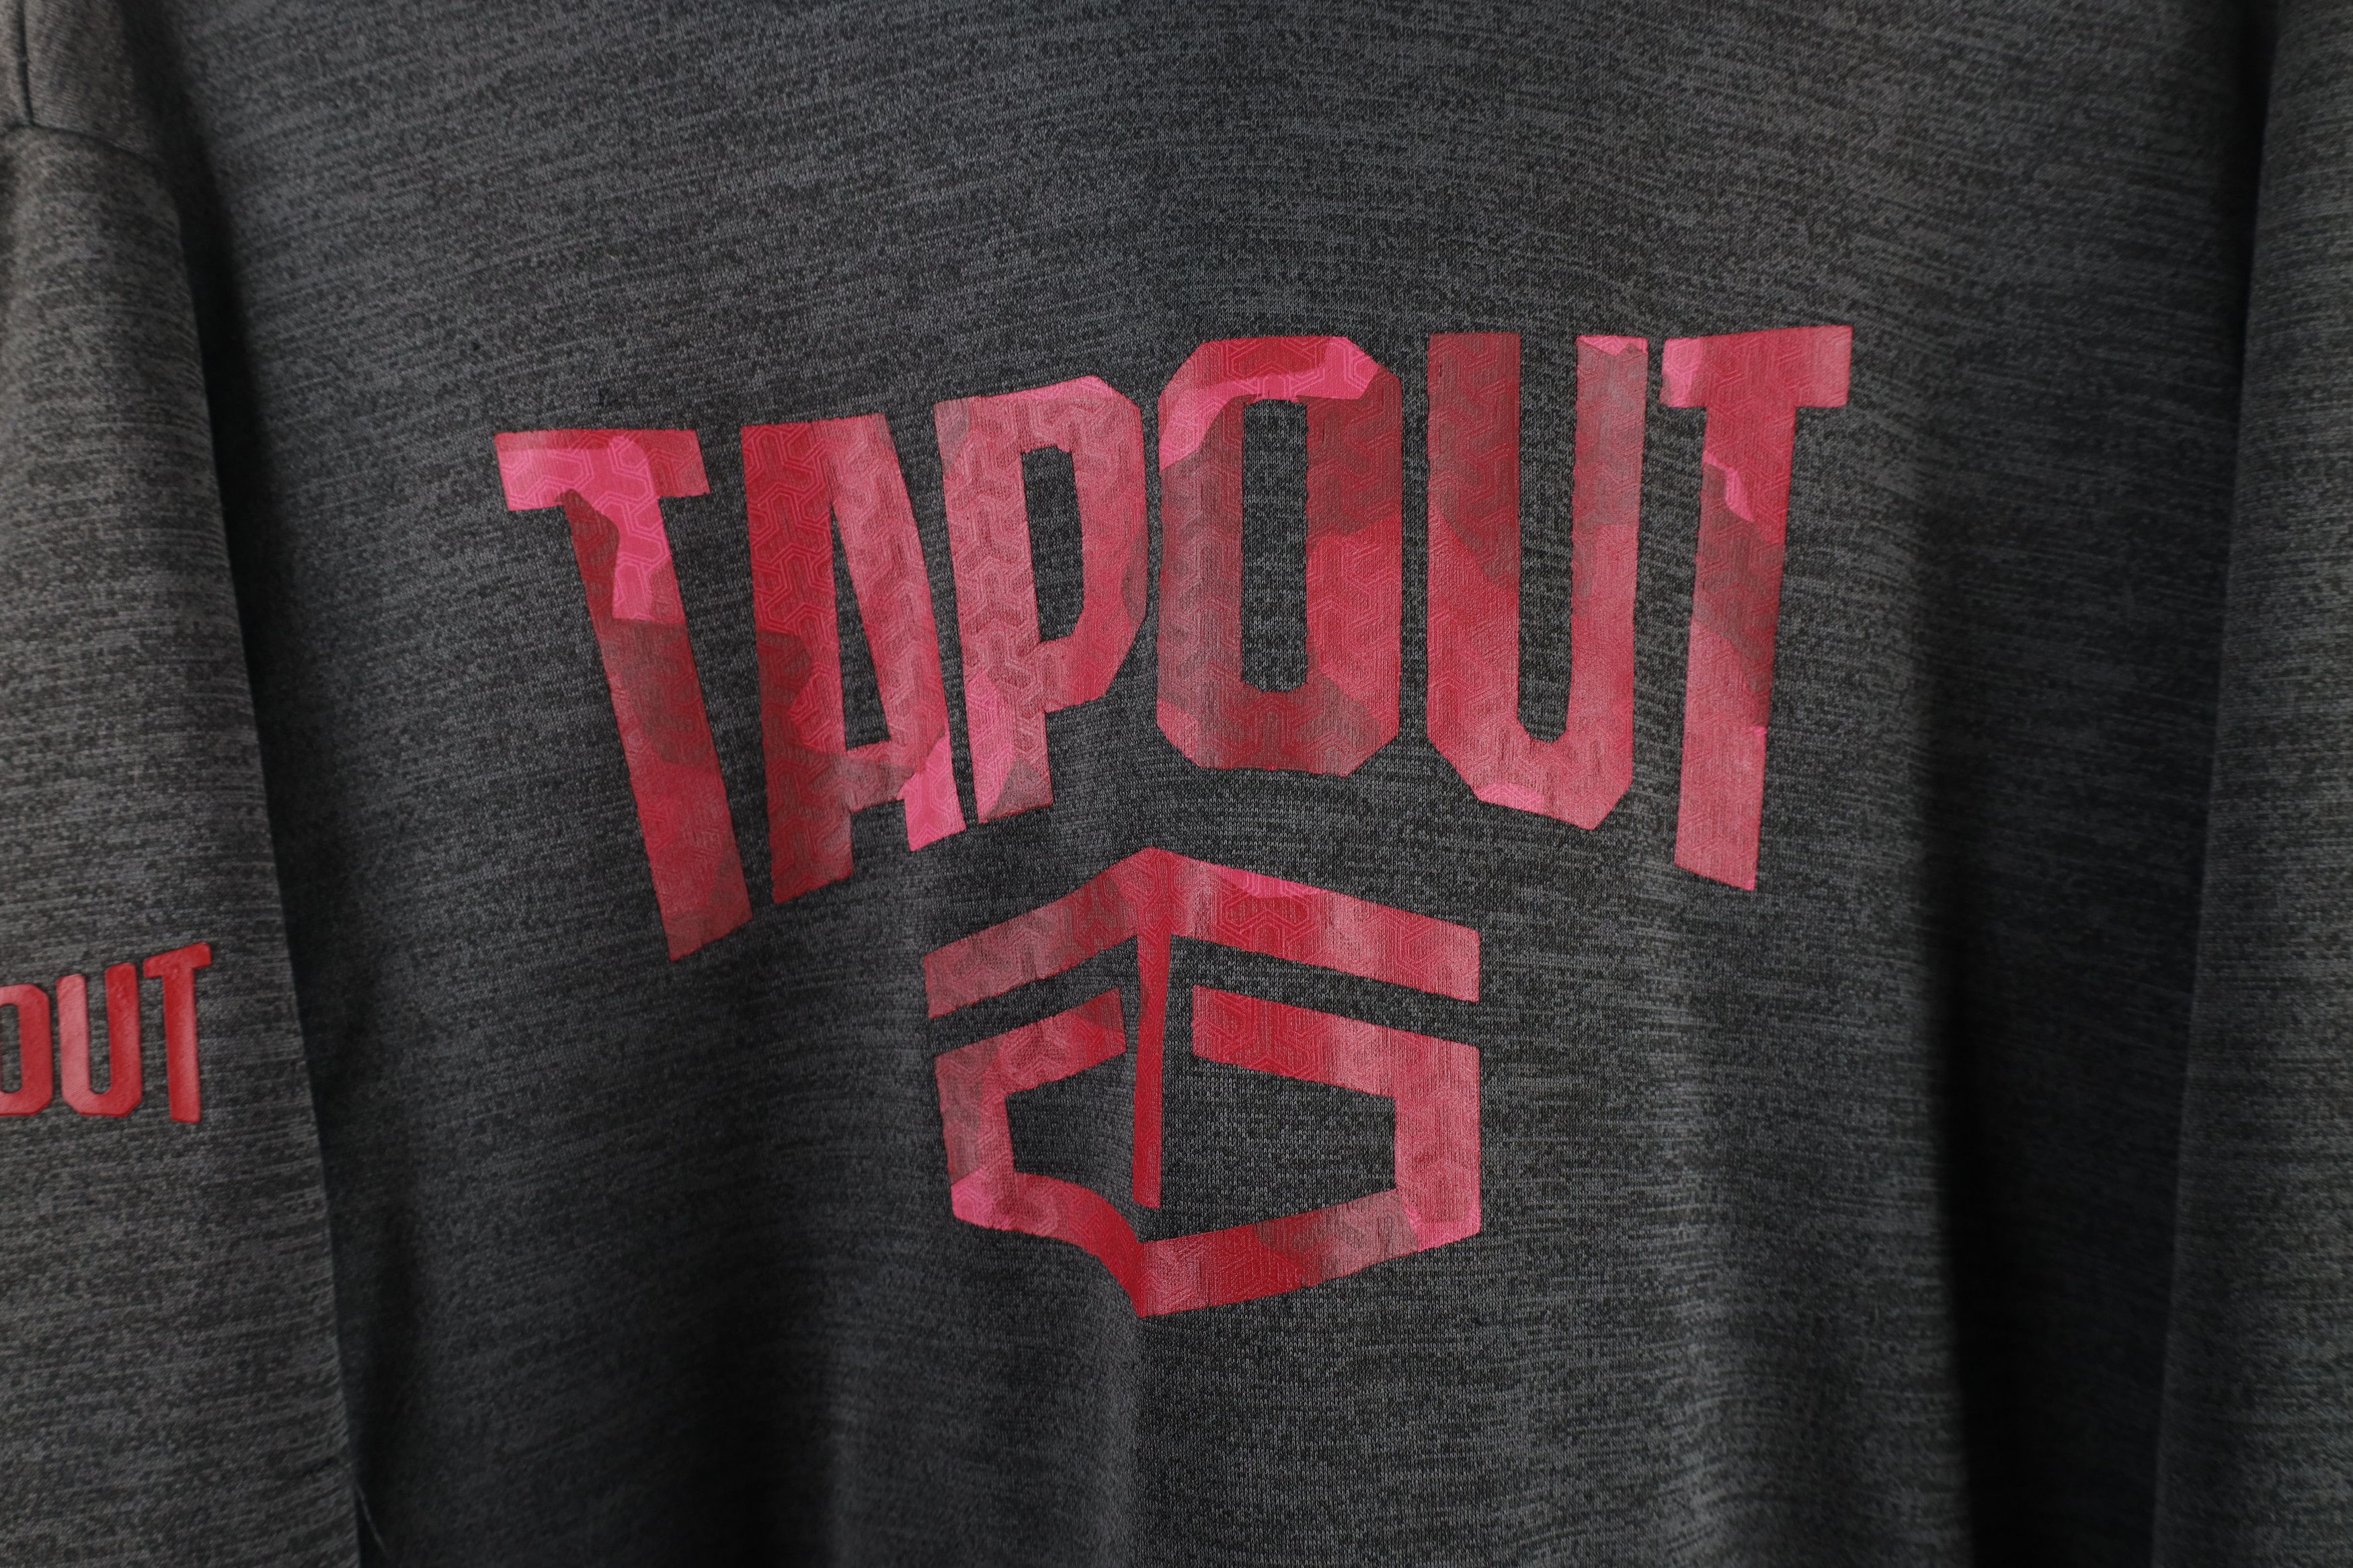 Vintage Tapout UFC MMA Fighting Out Hoodie Sweatshirt Heather Gray Size US M / EU 48-50 / 2 - 5 Thumbnail